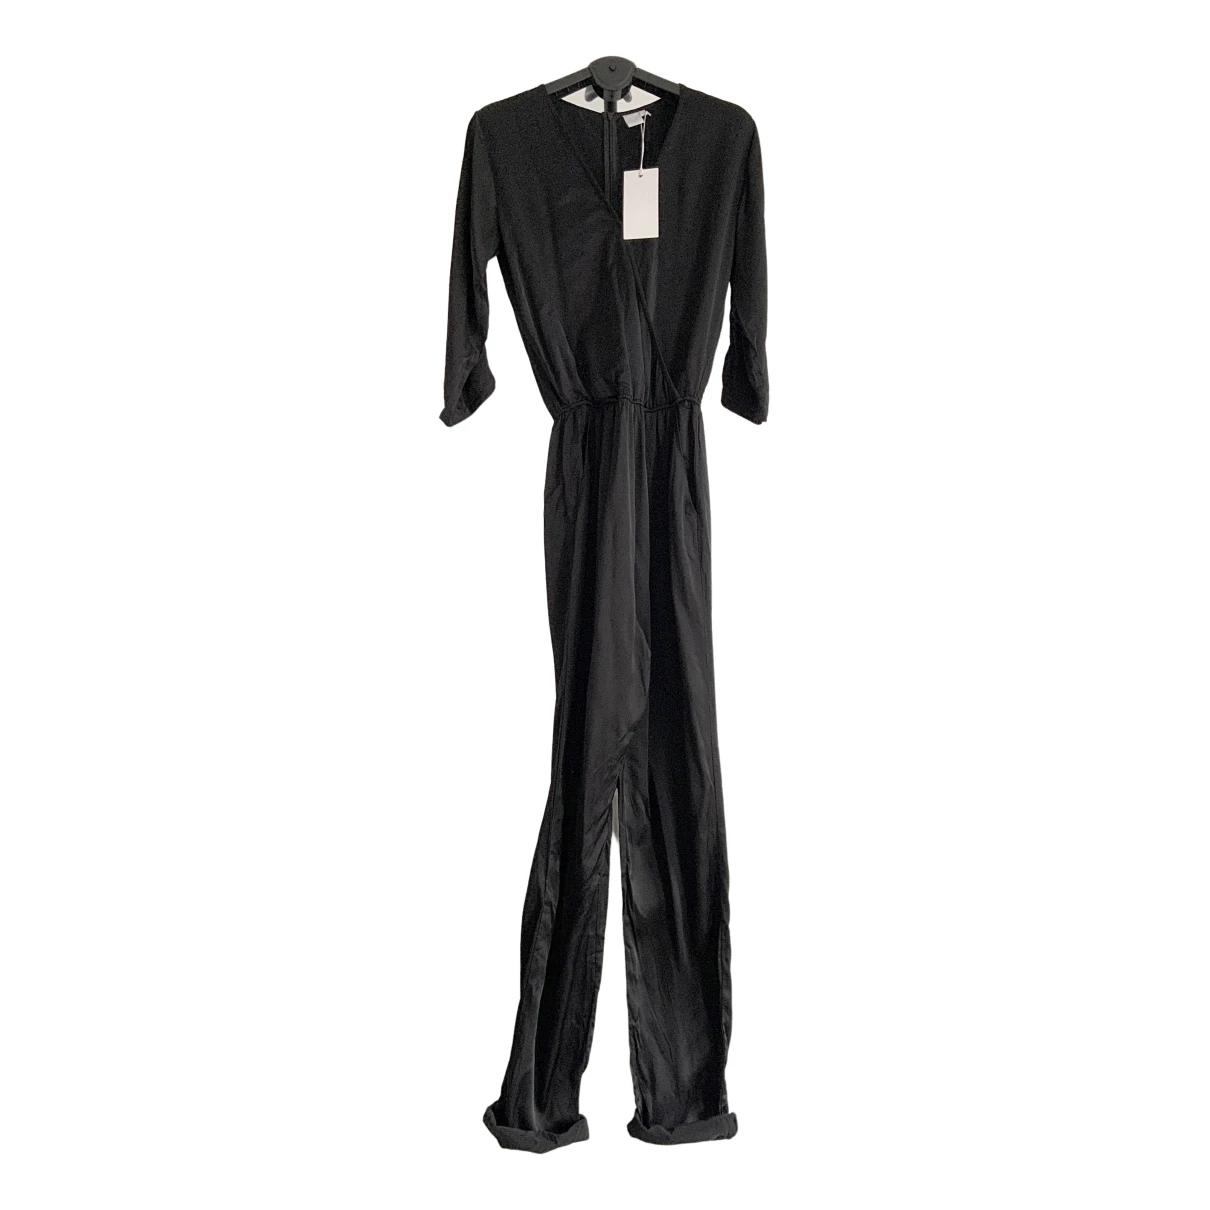 clothing mbyM jumpsuits for Female Viscose S International. Used condition